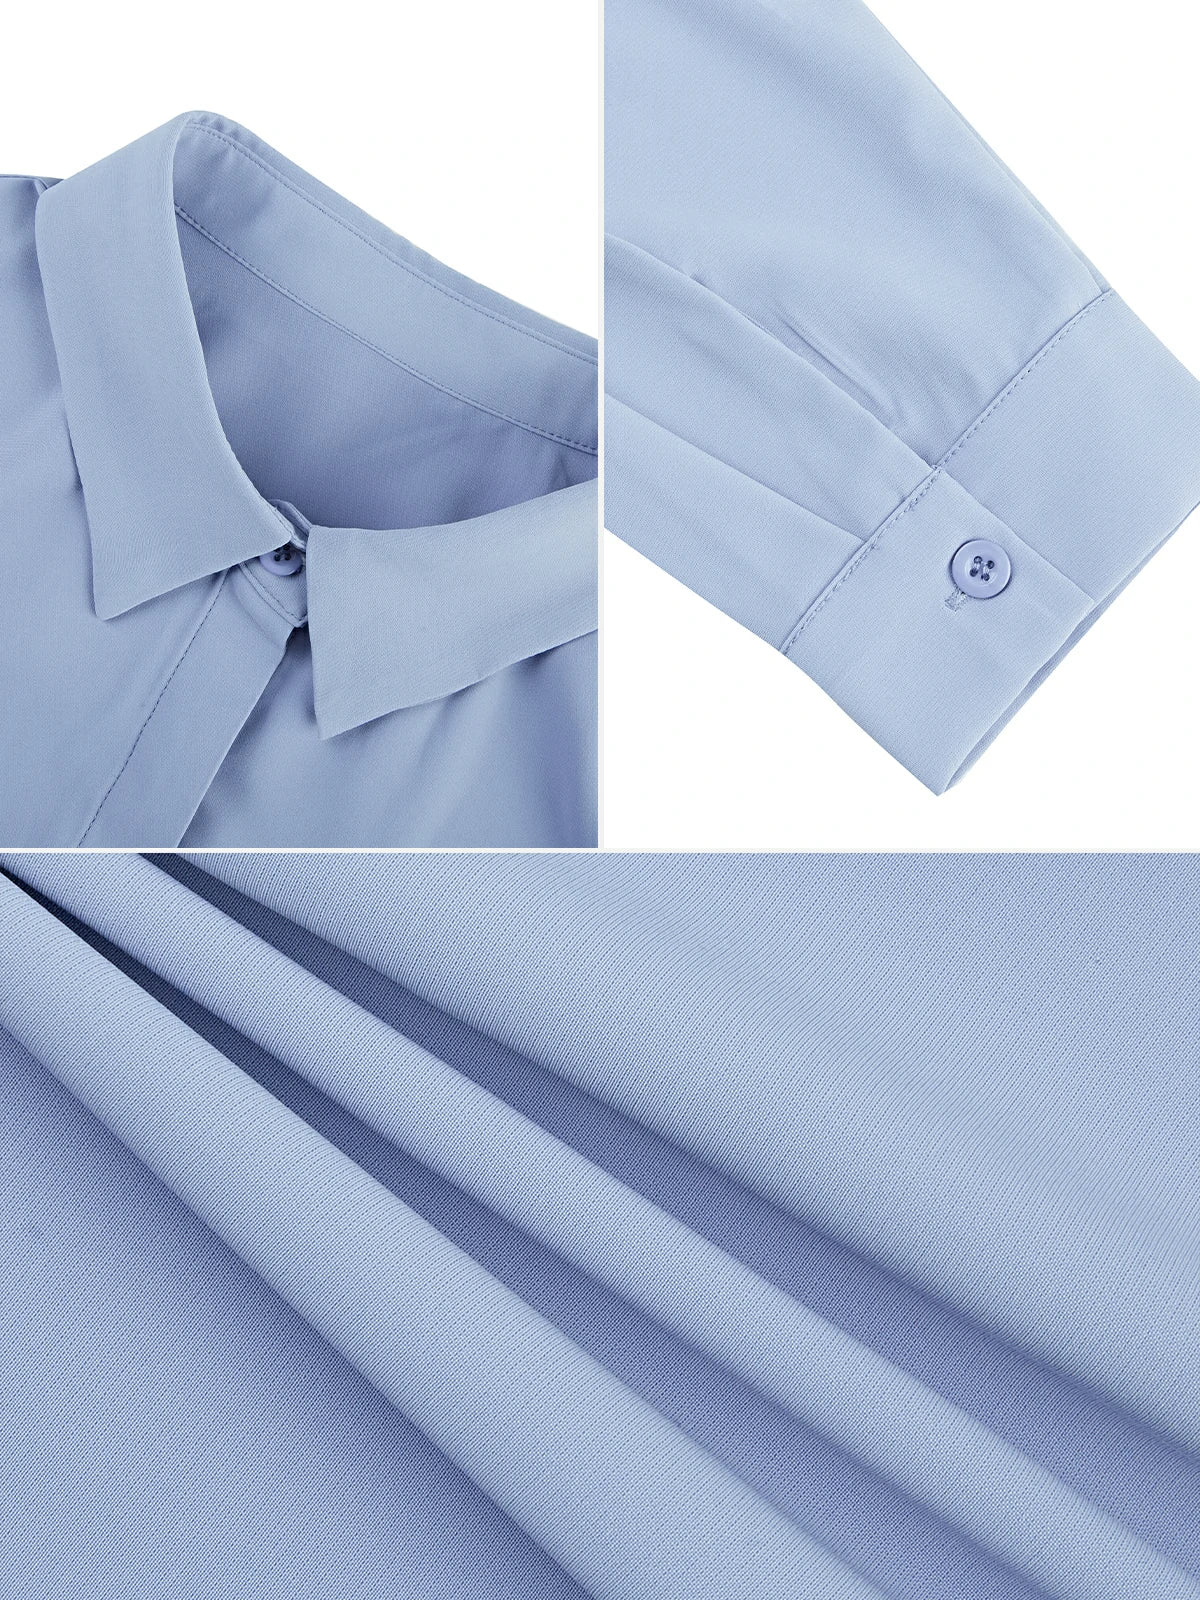 Elegant turnover collar chiffon shirt in blue, combining a tailored cut with a comfortable fit, perfect for versatile and stylish dressing.